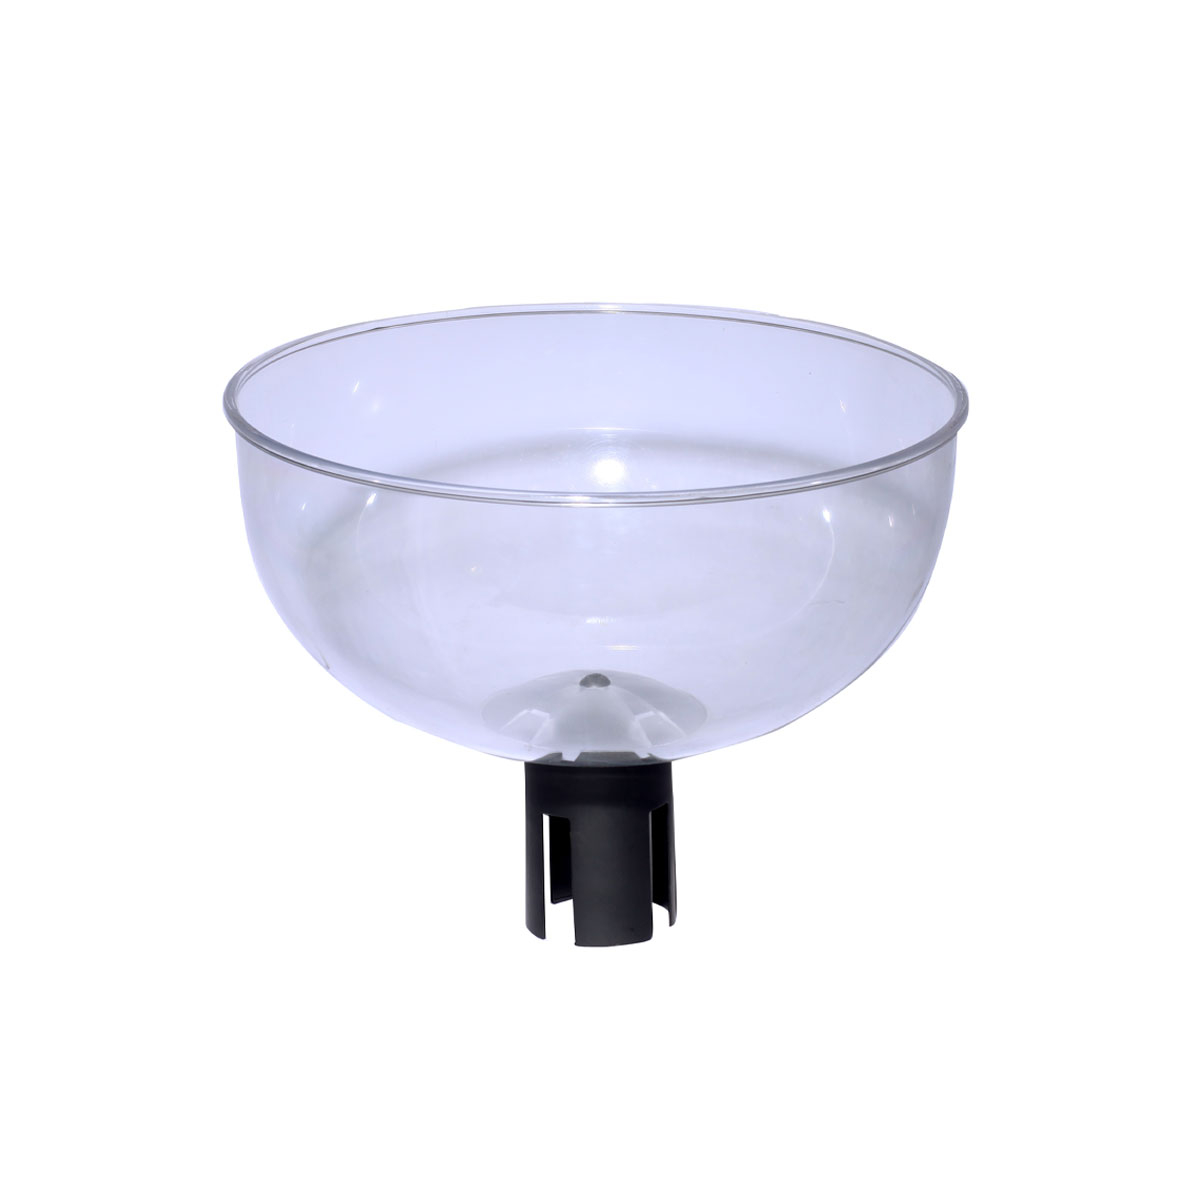 Queue Barrier Display Bowl Compatible With All Major Brands of Barriers